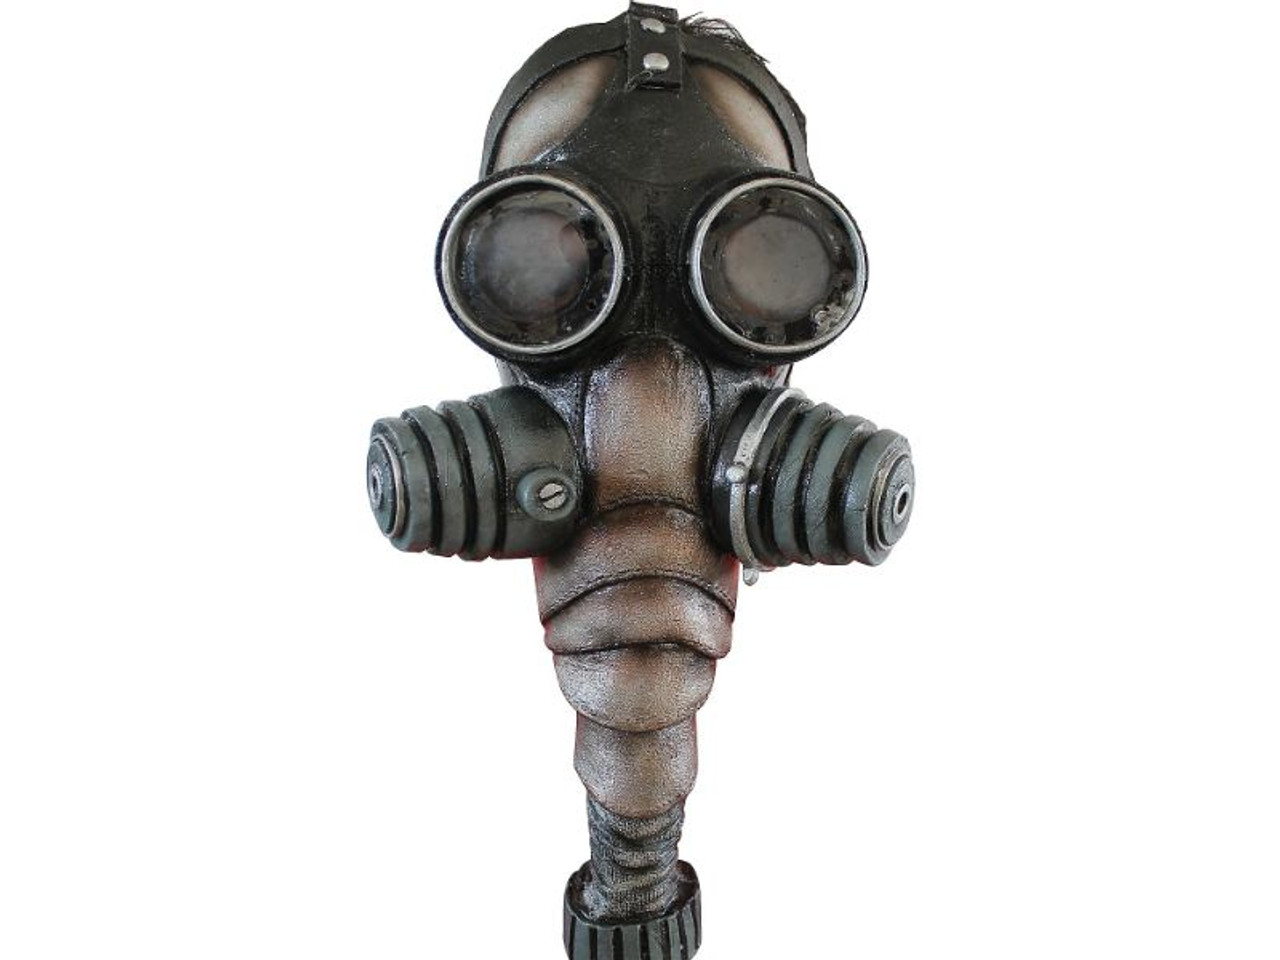 Gas Mask with Realistic Canister Protrusions for Post-Apocalyptic Halloween Costume - High-Quality and Comfortable Design.